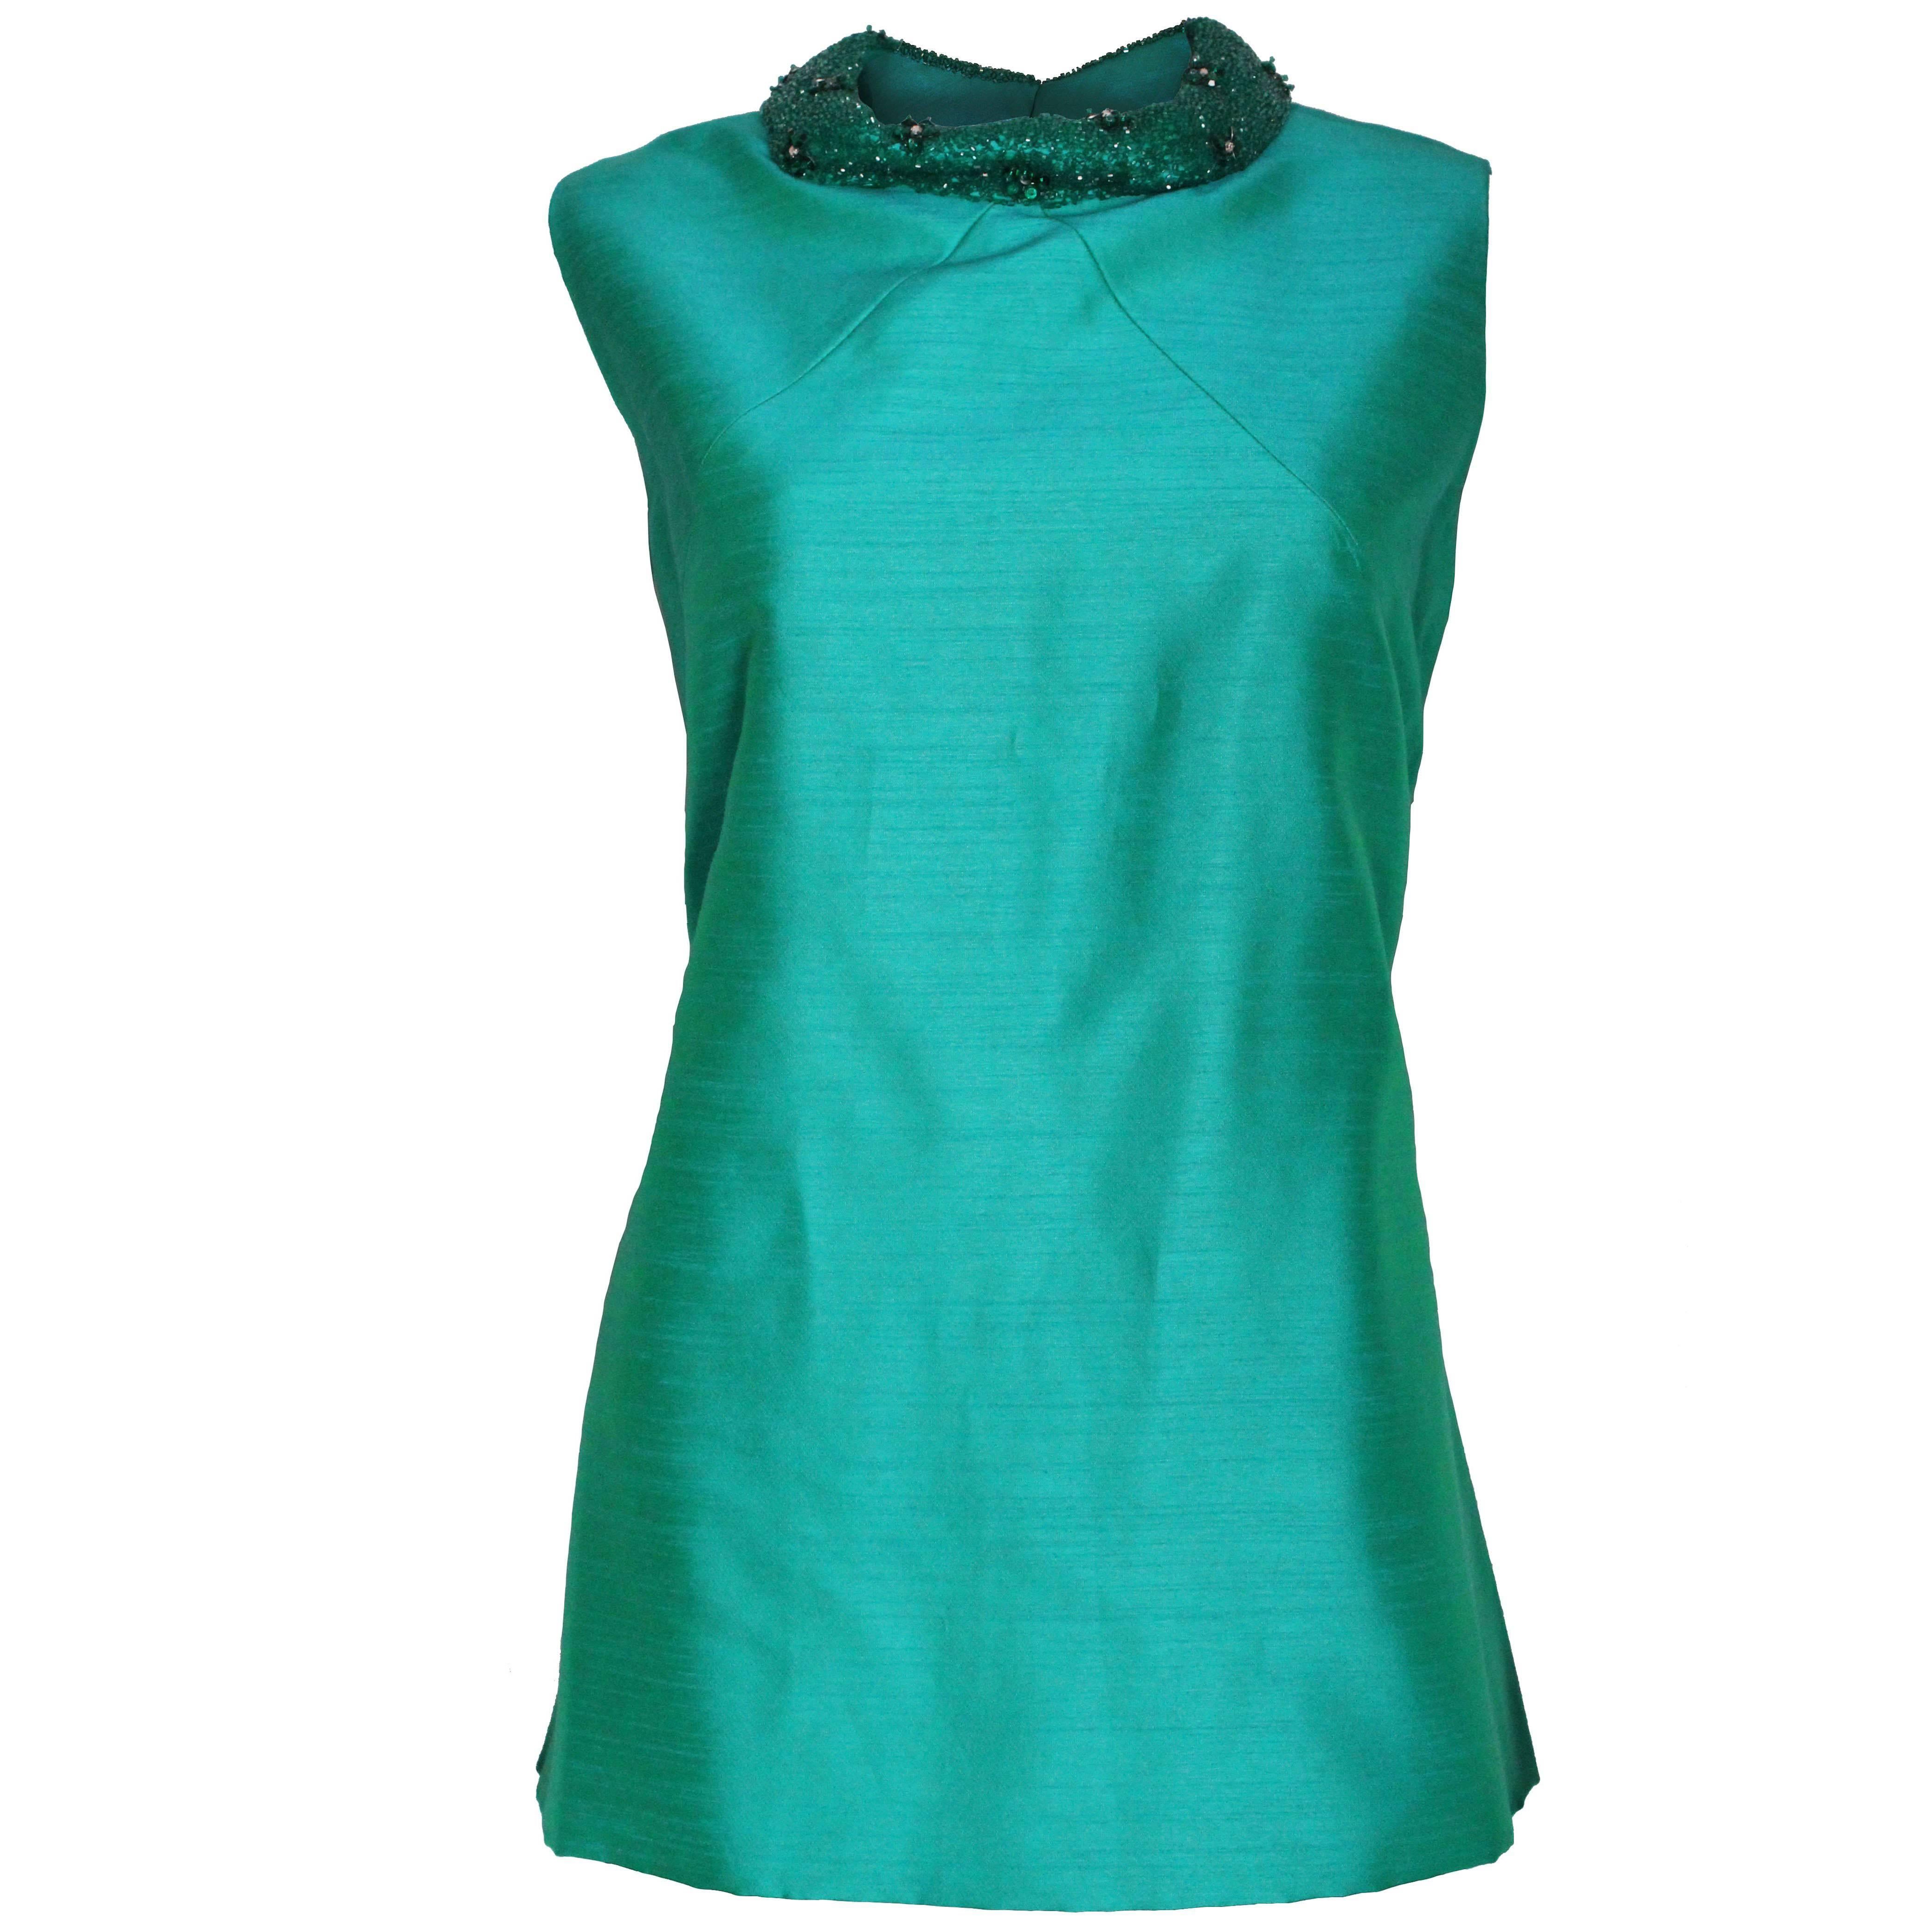 1960s Turquoise Silk Beaded Collar Shift Top by Peter Barron